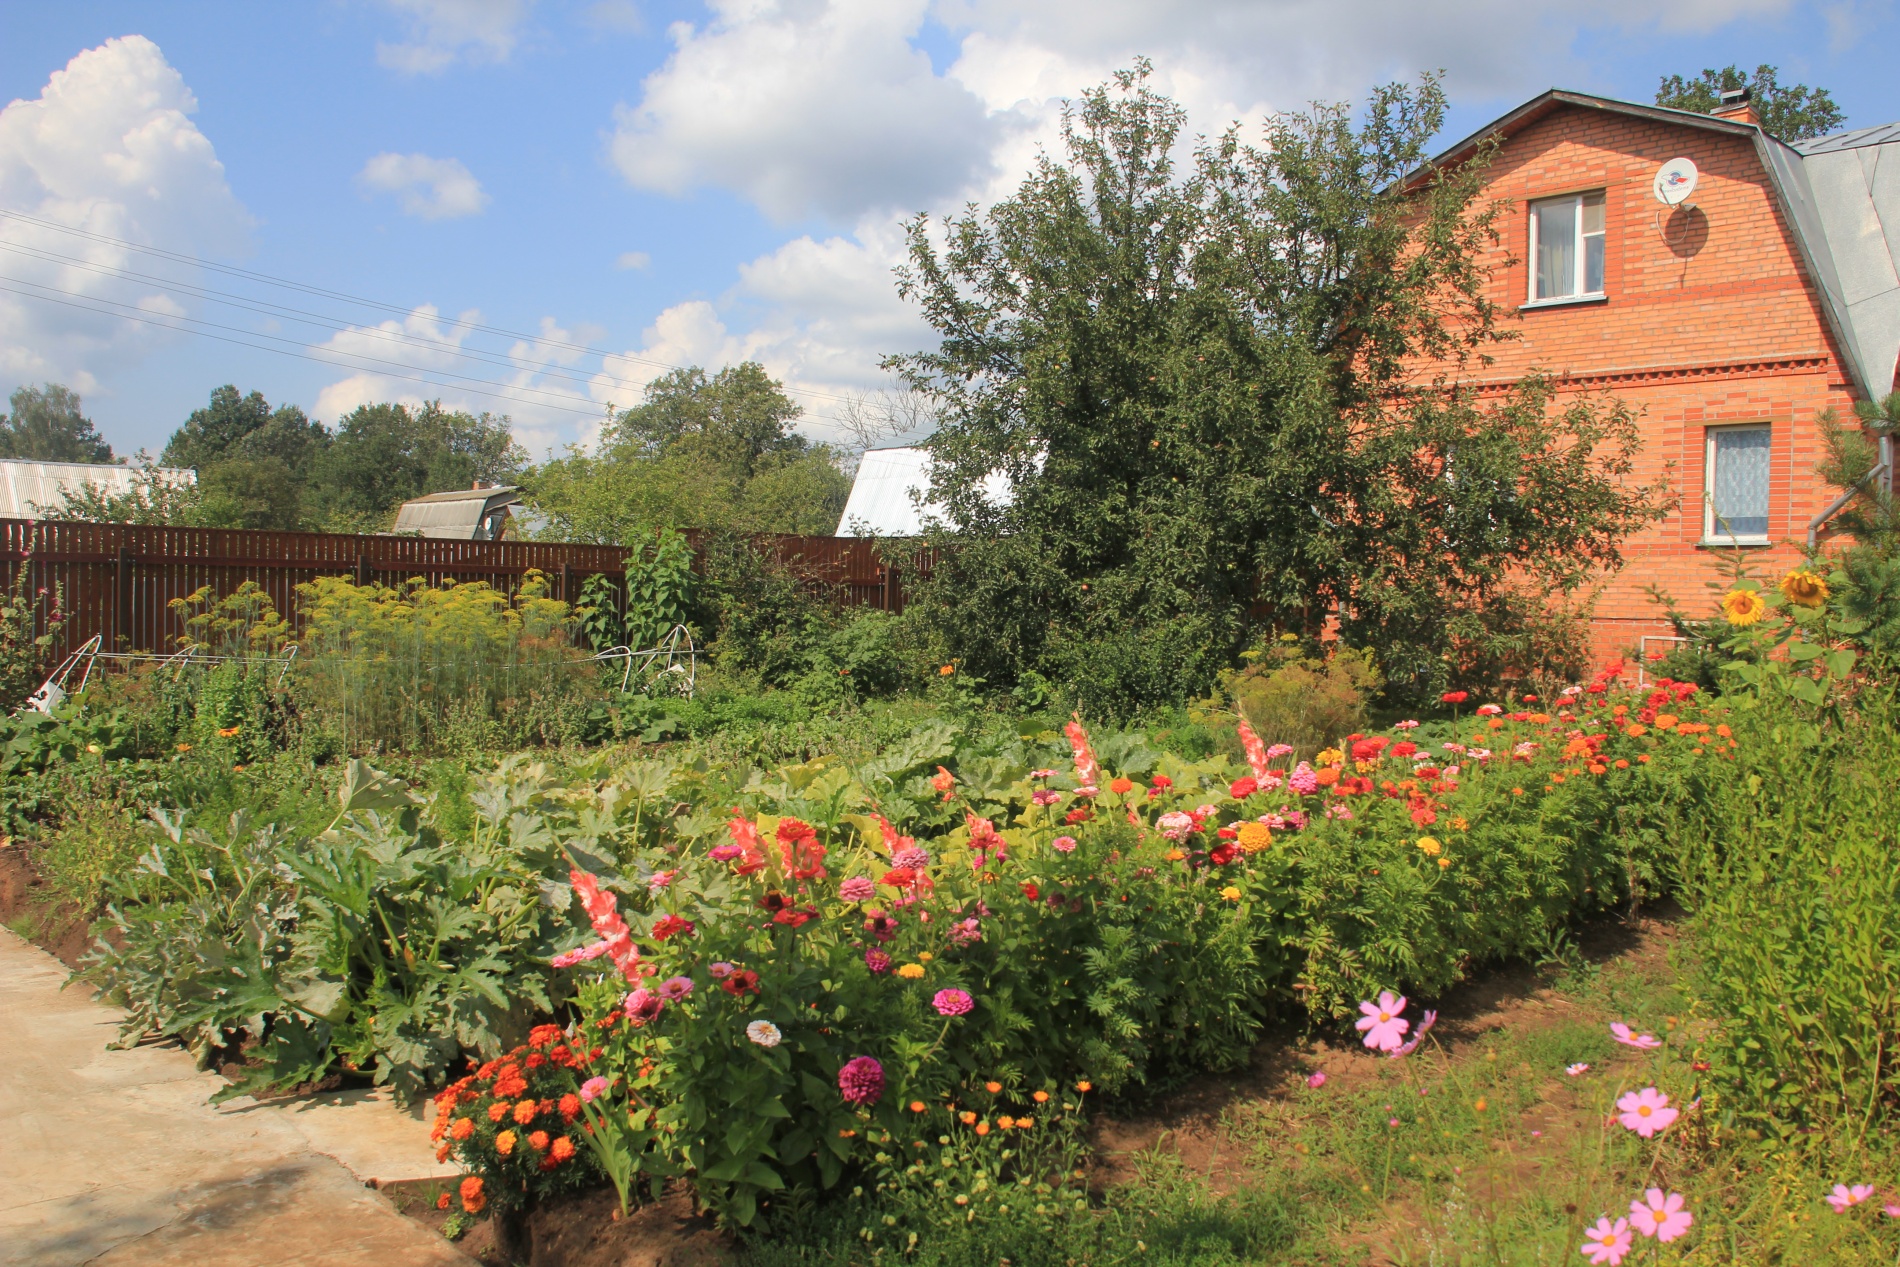 Flowers bloom in front a dacha, a typical Russian country home.